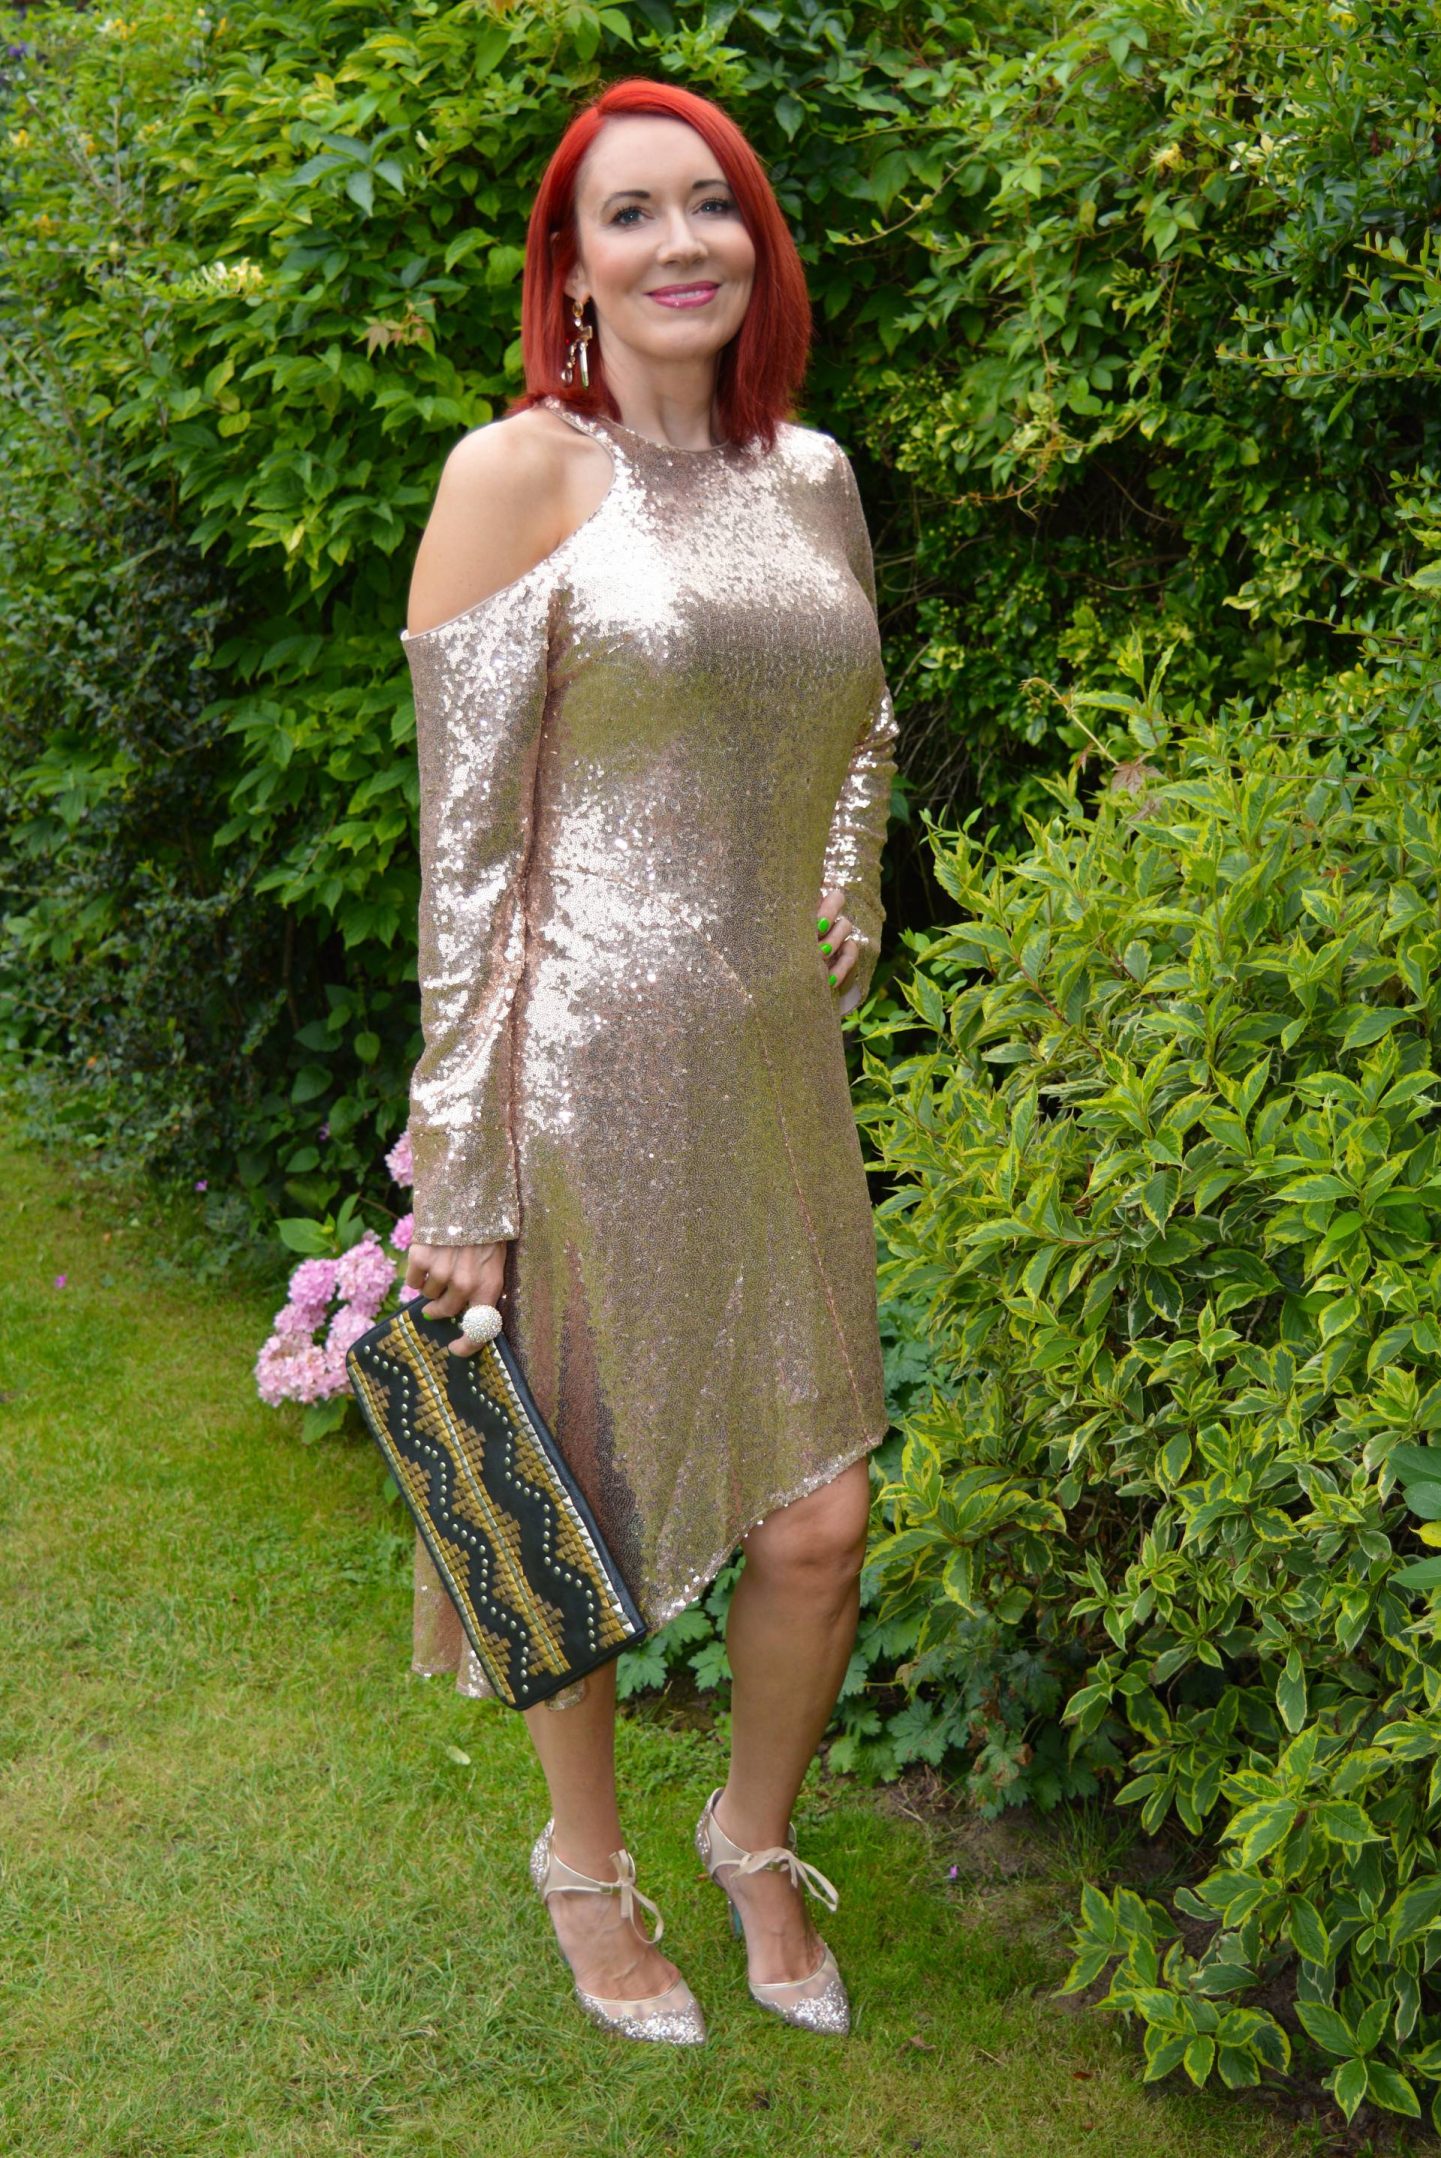 Fool's Gold - August's Thrifty Six, Kitri gold sequin dress, Betsey Johnson gold glitter shoes, Asos black studded clutch